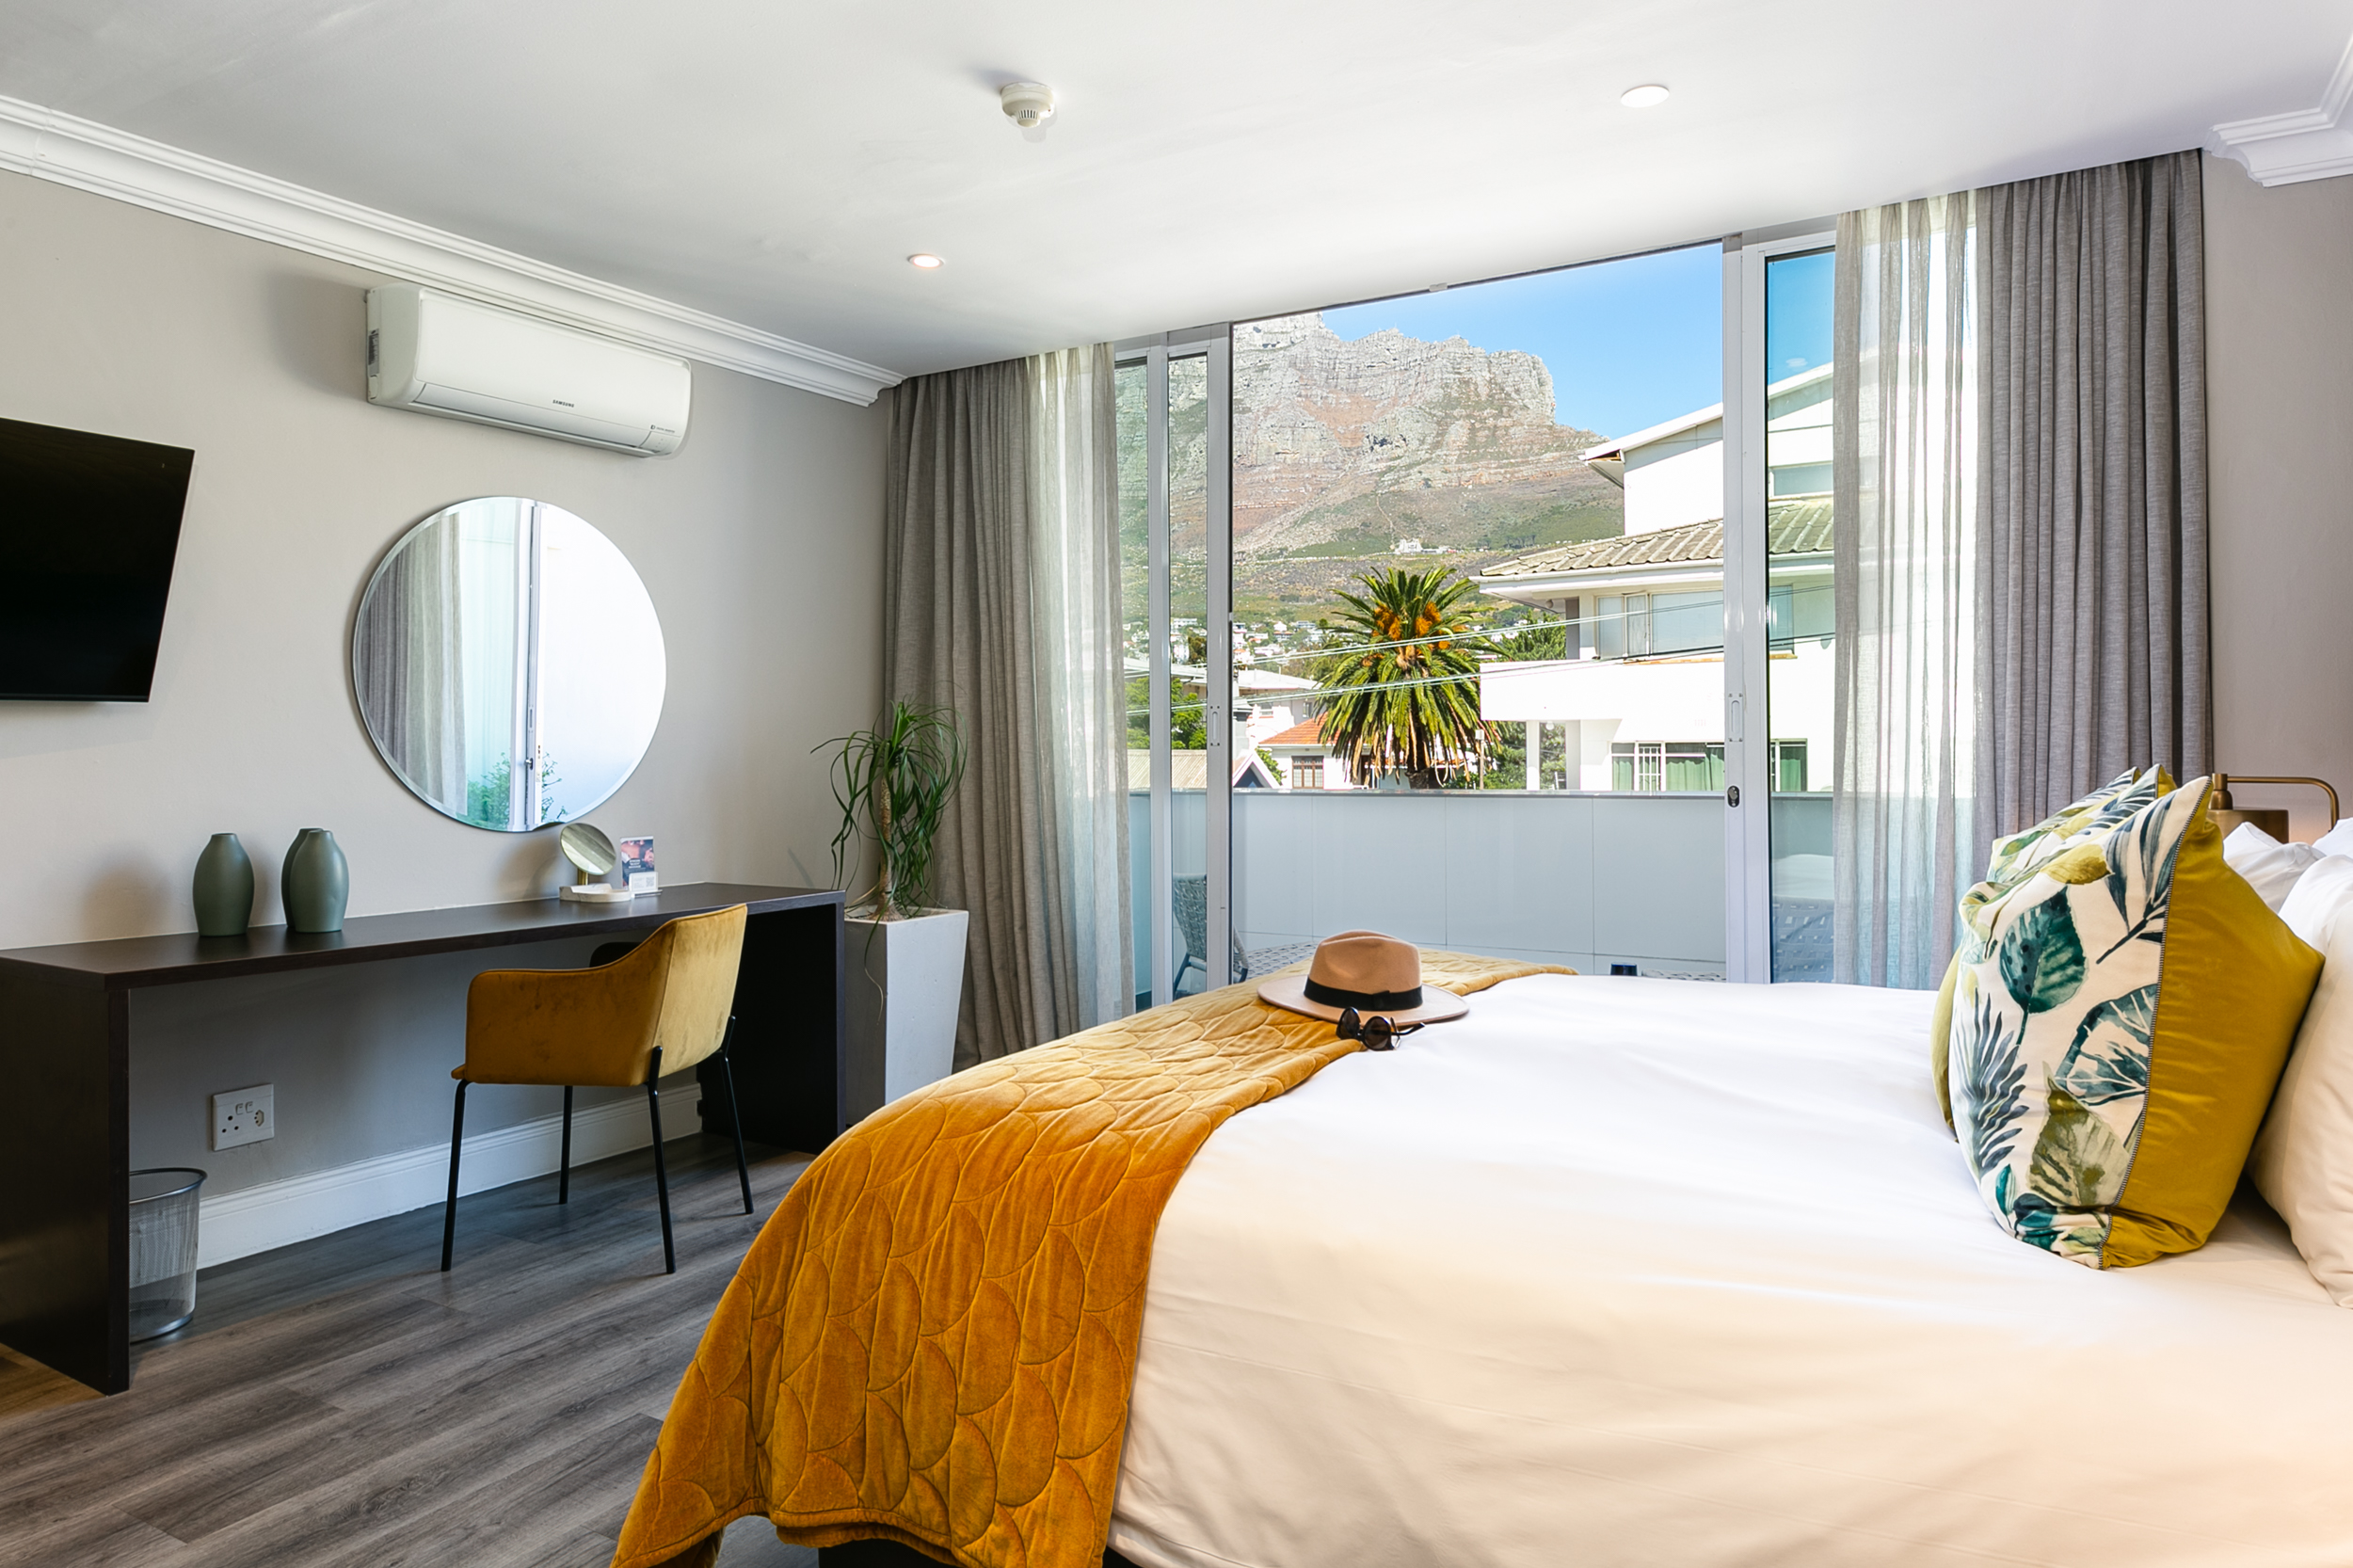 Why Stay in Gardens, Cape Town? Discover Boutique Hotel Gems